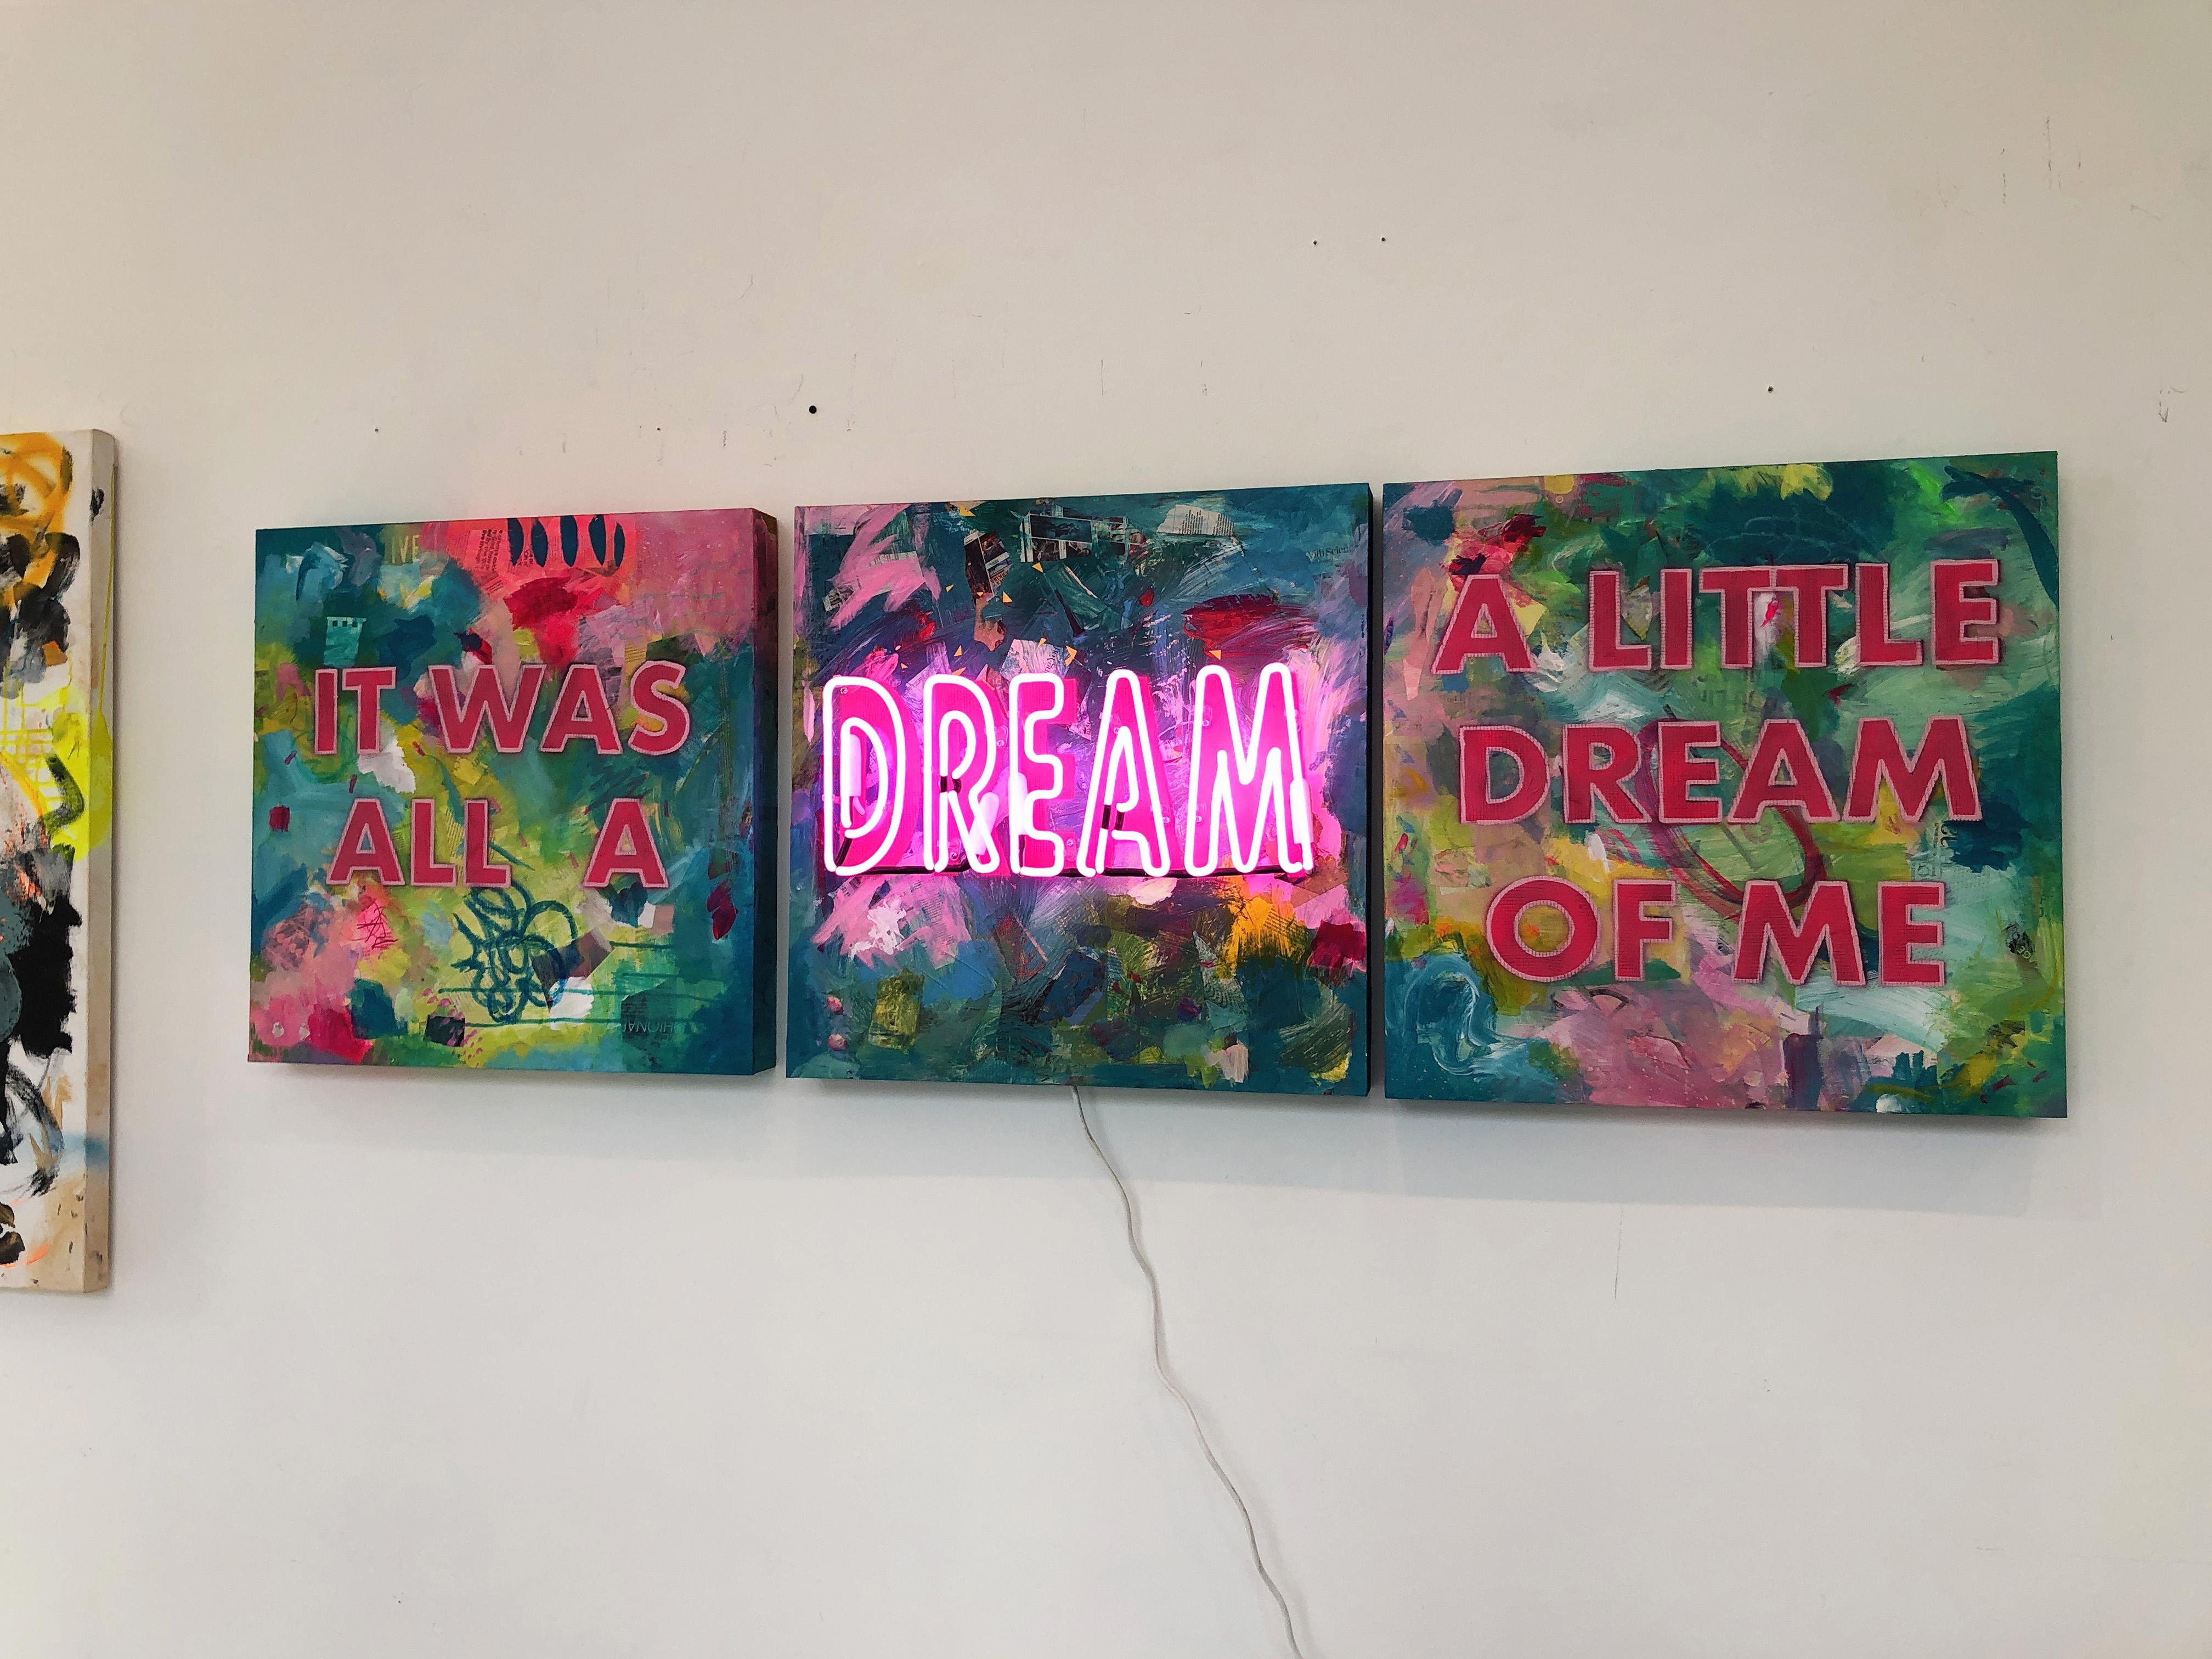  It Was All A Dream A Little Dream of Me - Triptych Acrylic on wood and Neon - Contemporary Painting by Amy Smith